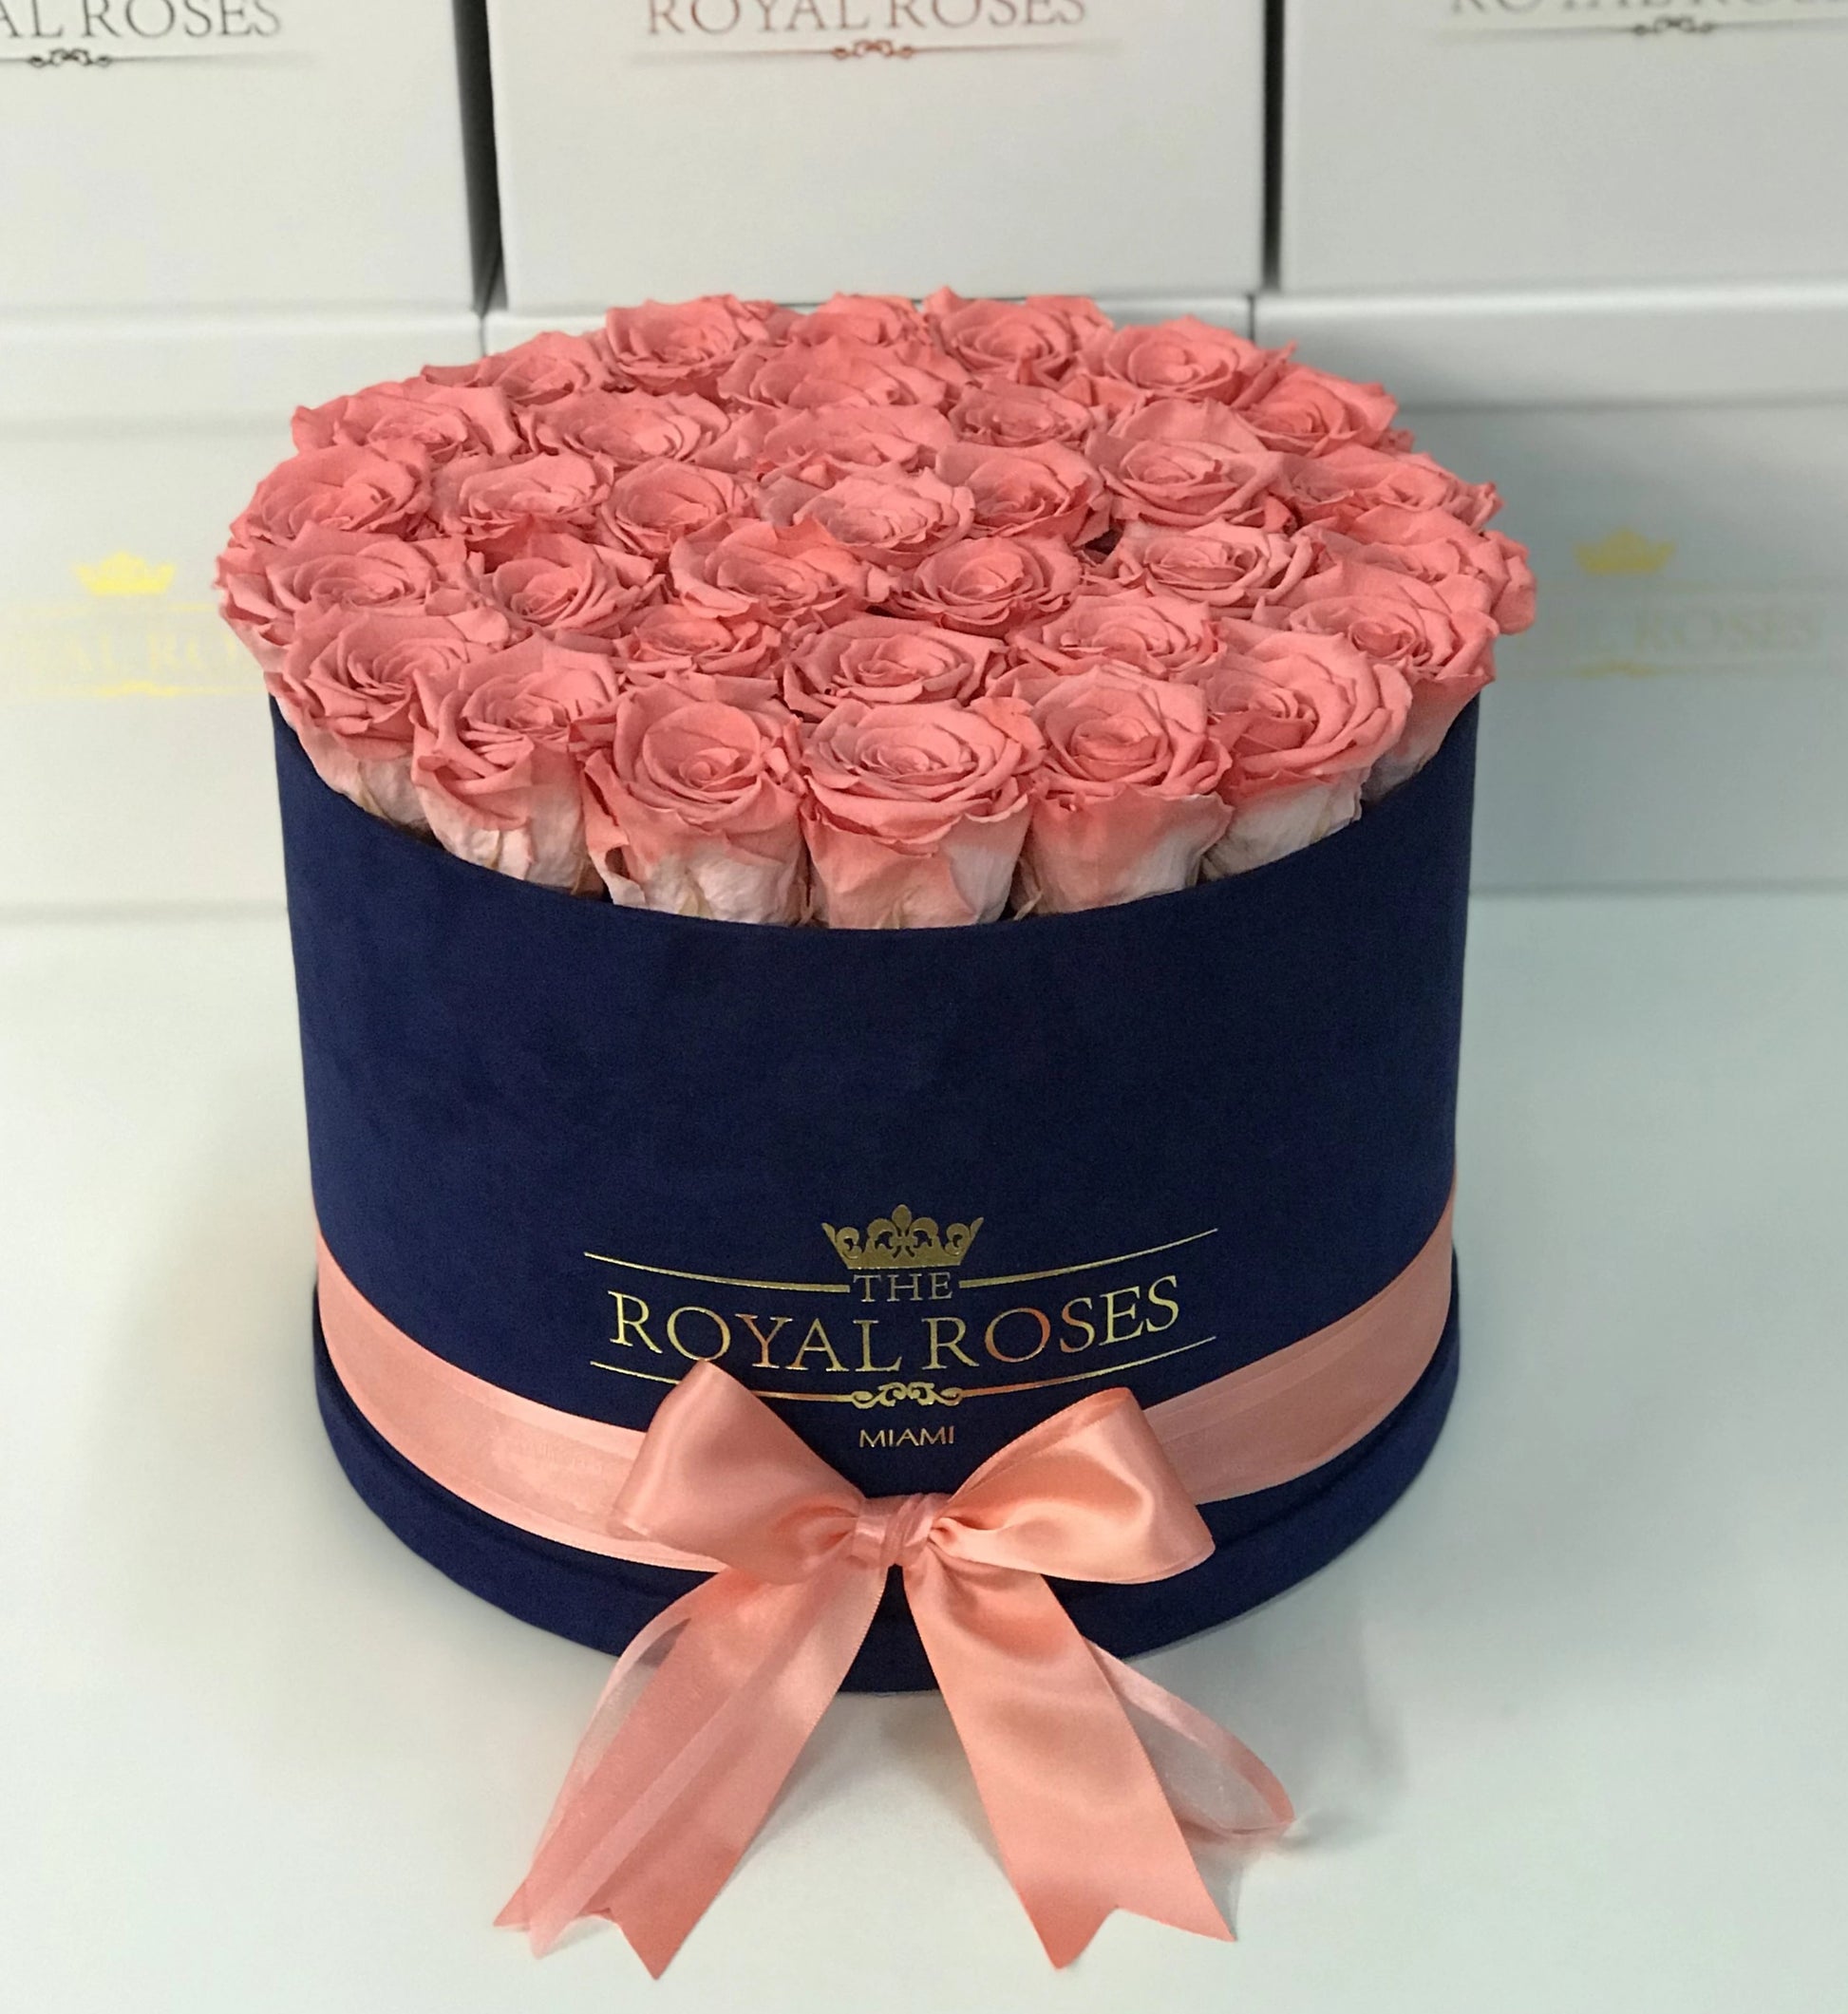 Real Long Lasting Roses- Round Box - Lifetime is Over 1 Year - The Royal Roses 